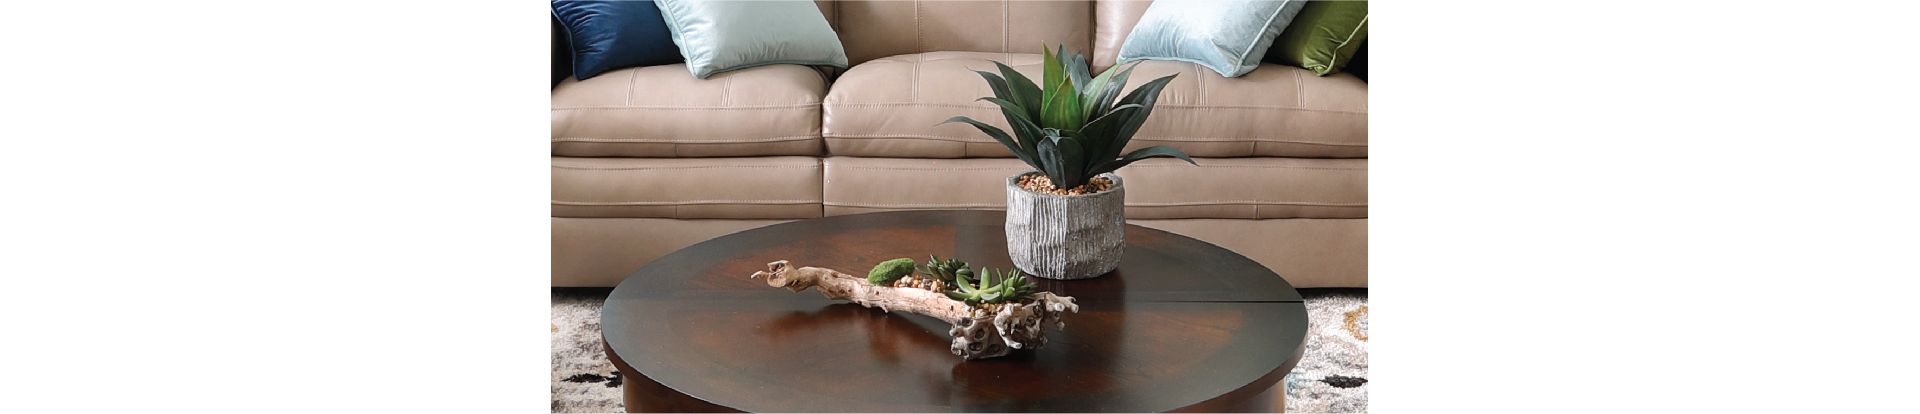 Plants and Home Decor